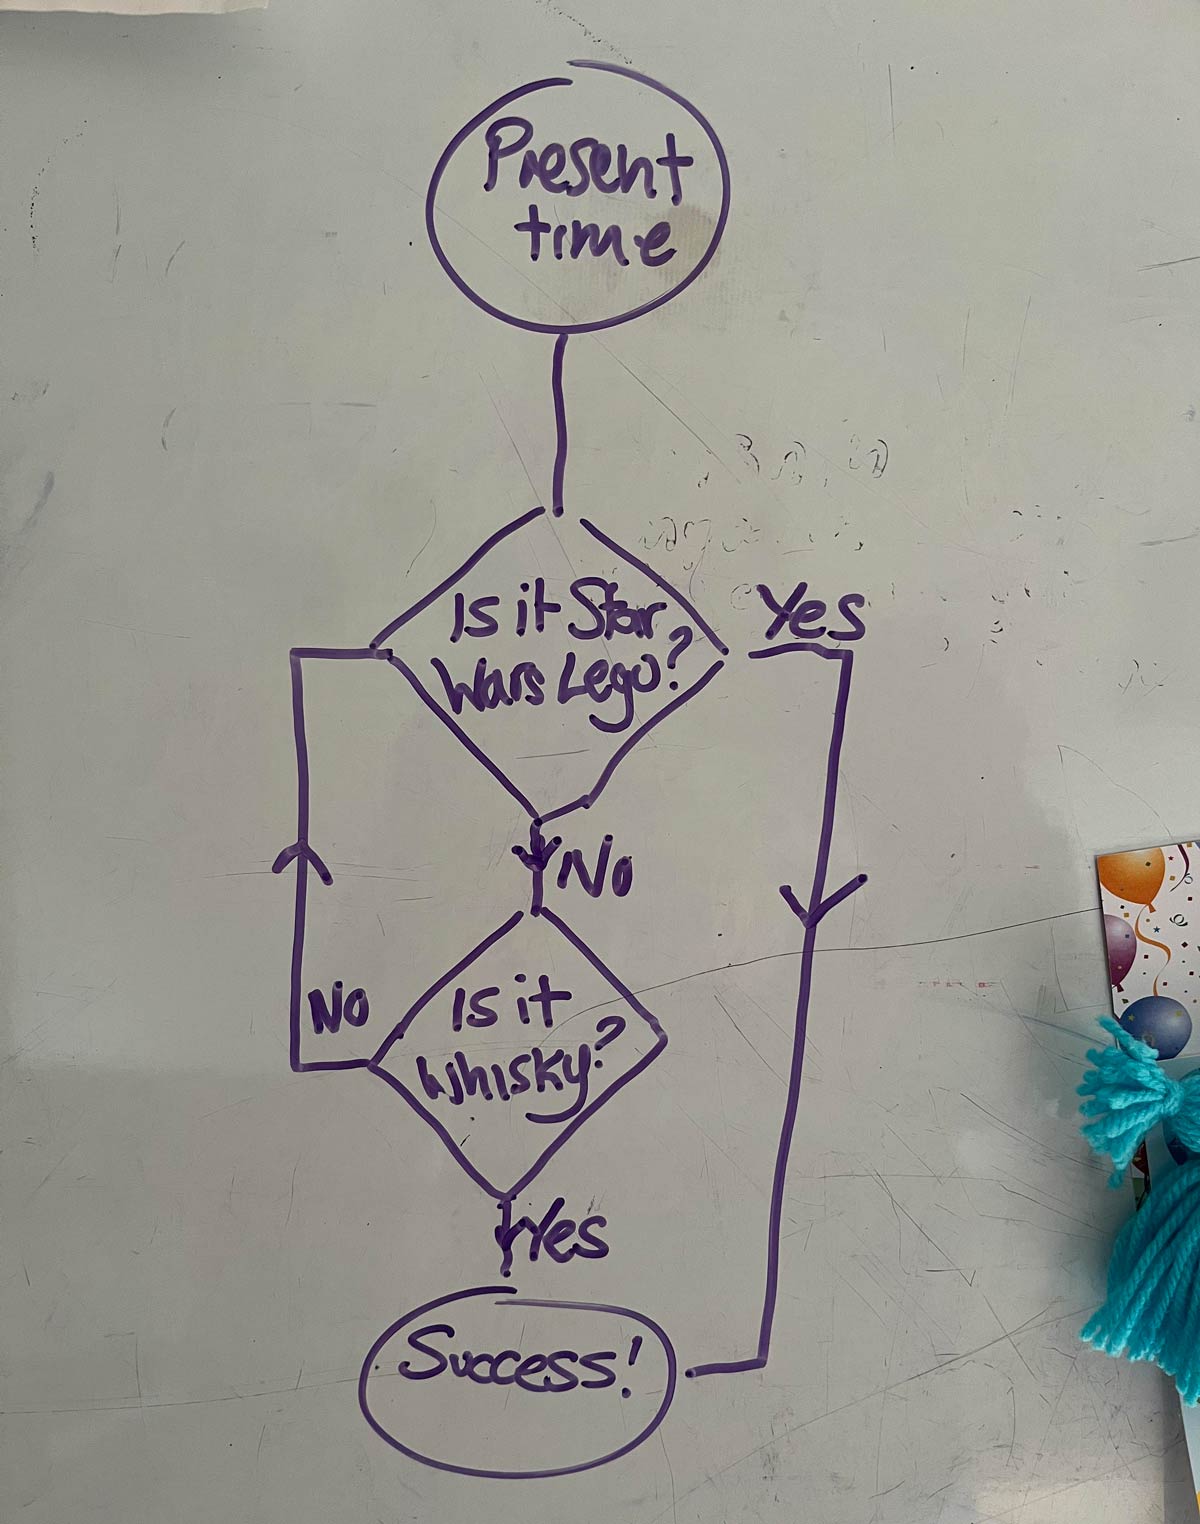 My wife says I’m difficult to buy presents for. So I made her a handy flowchart